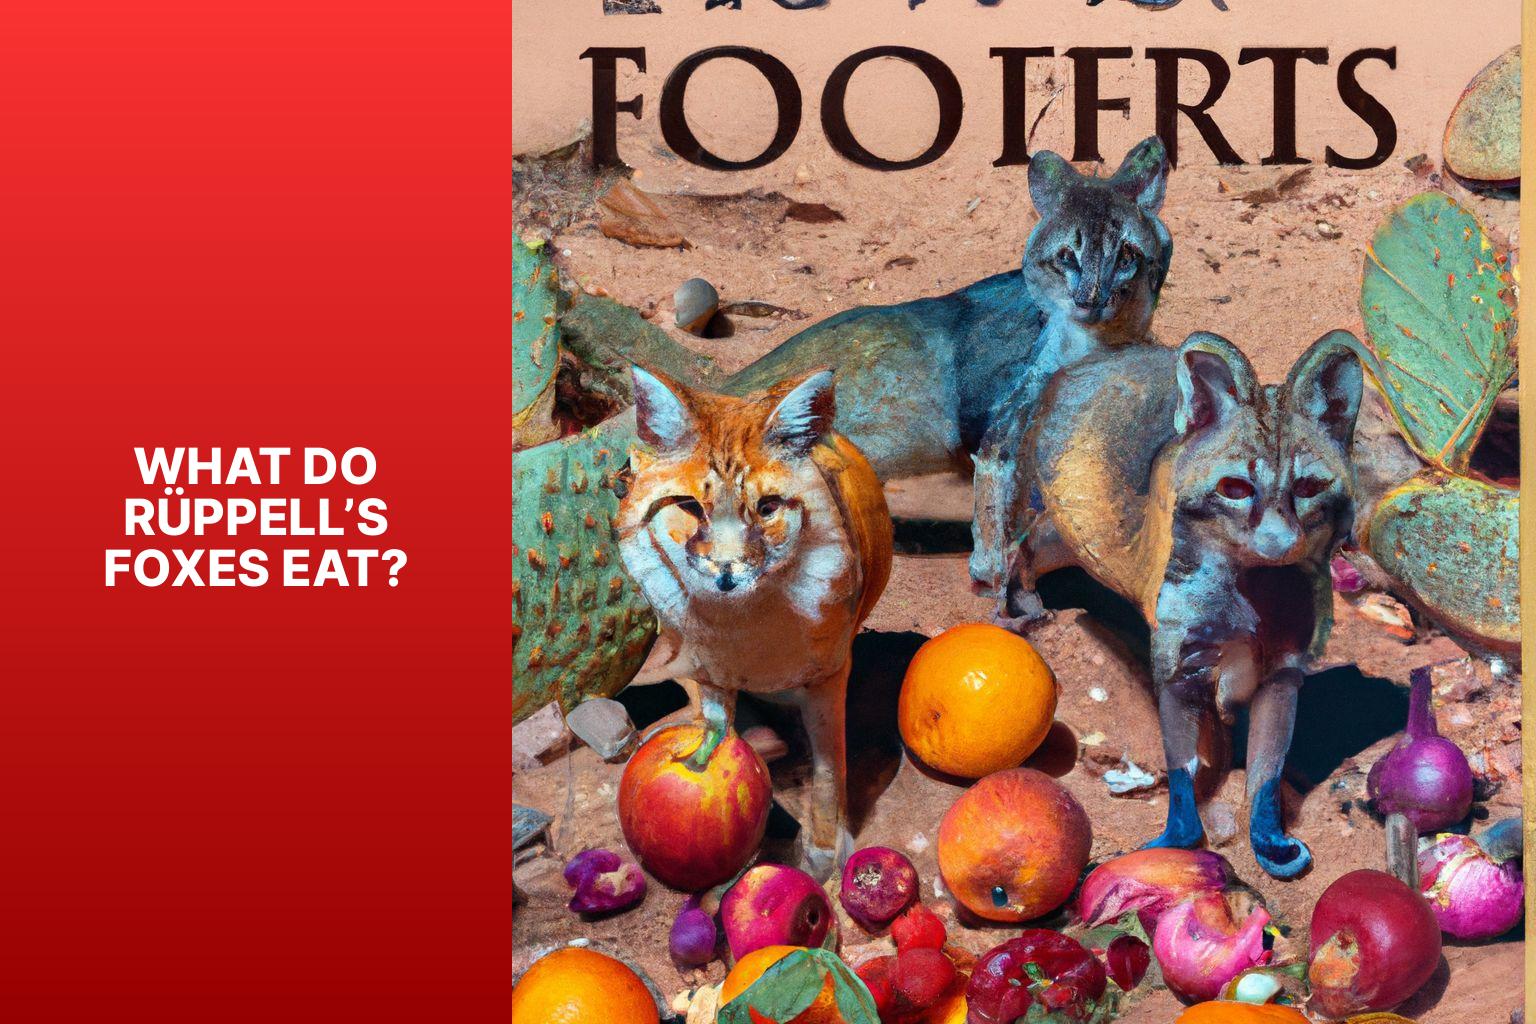 What Do R ppell s Foxes Eat? - R ppell s Fox Diet 